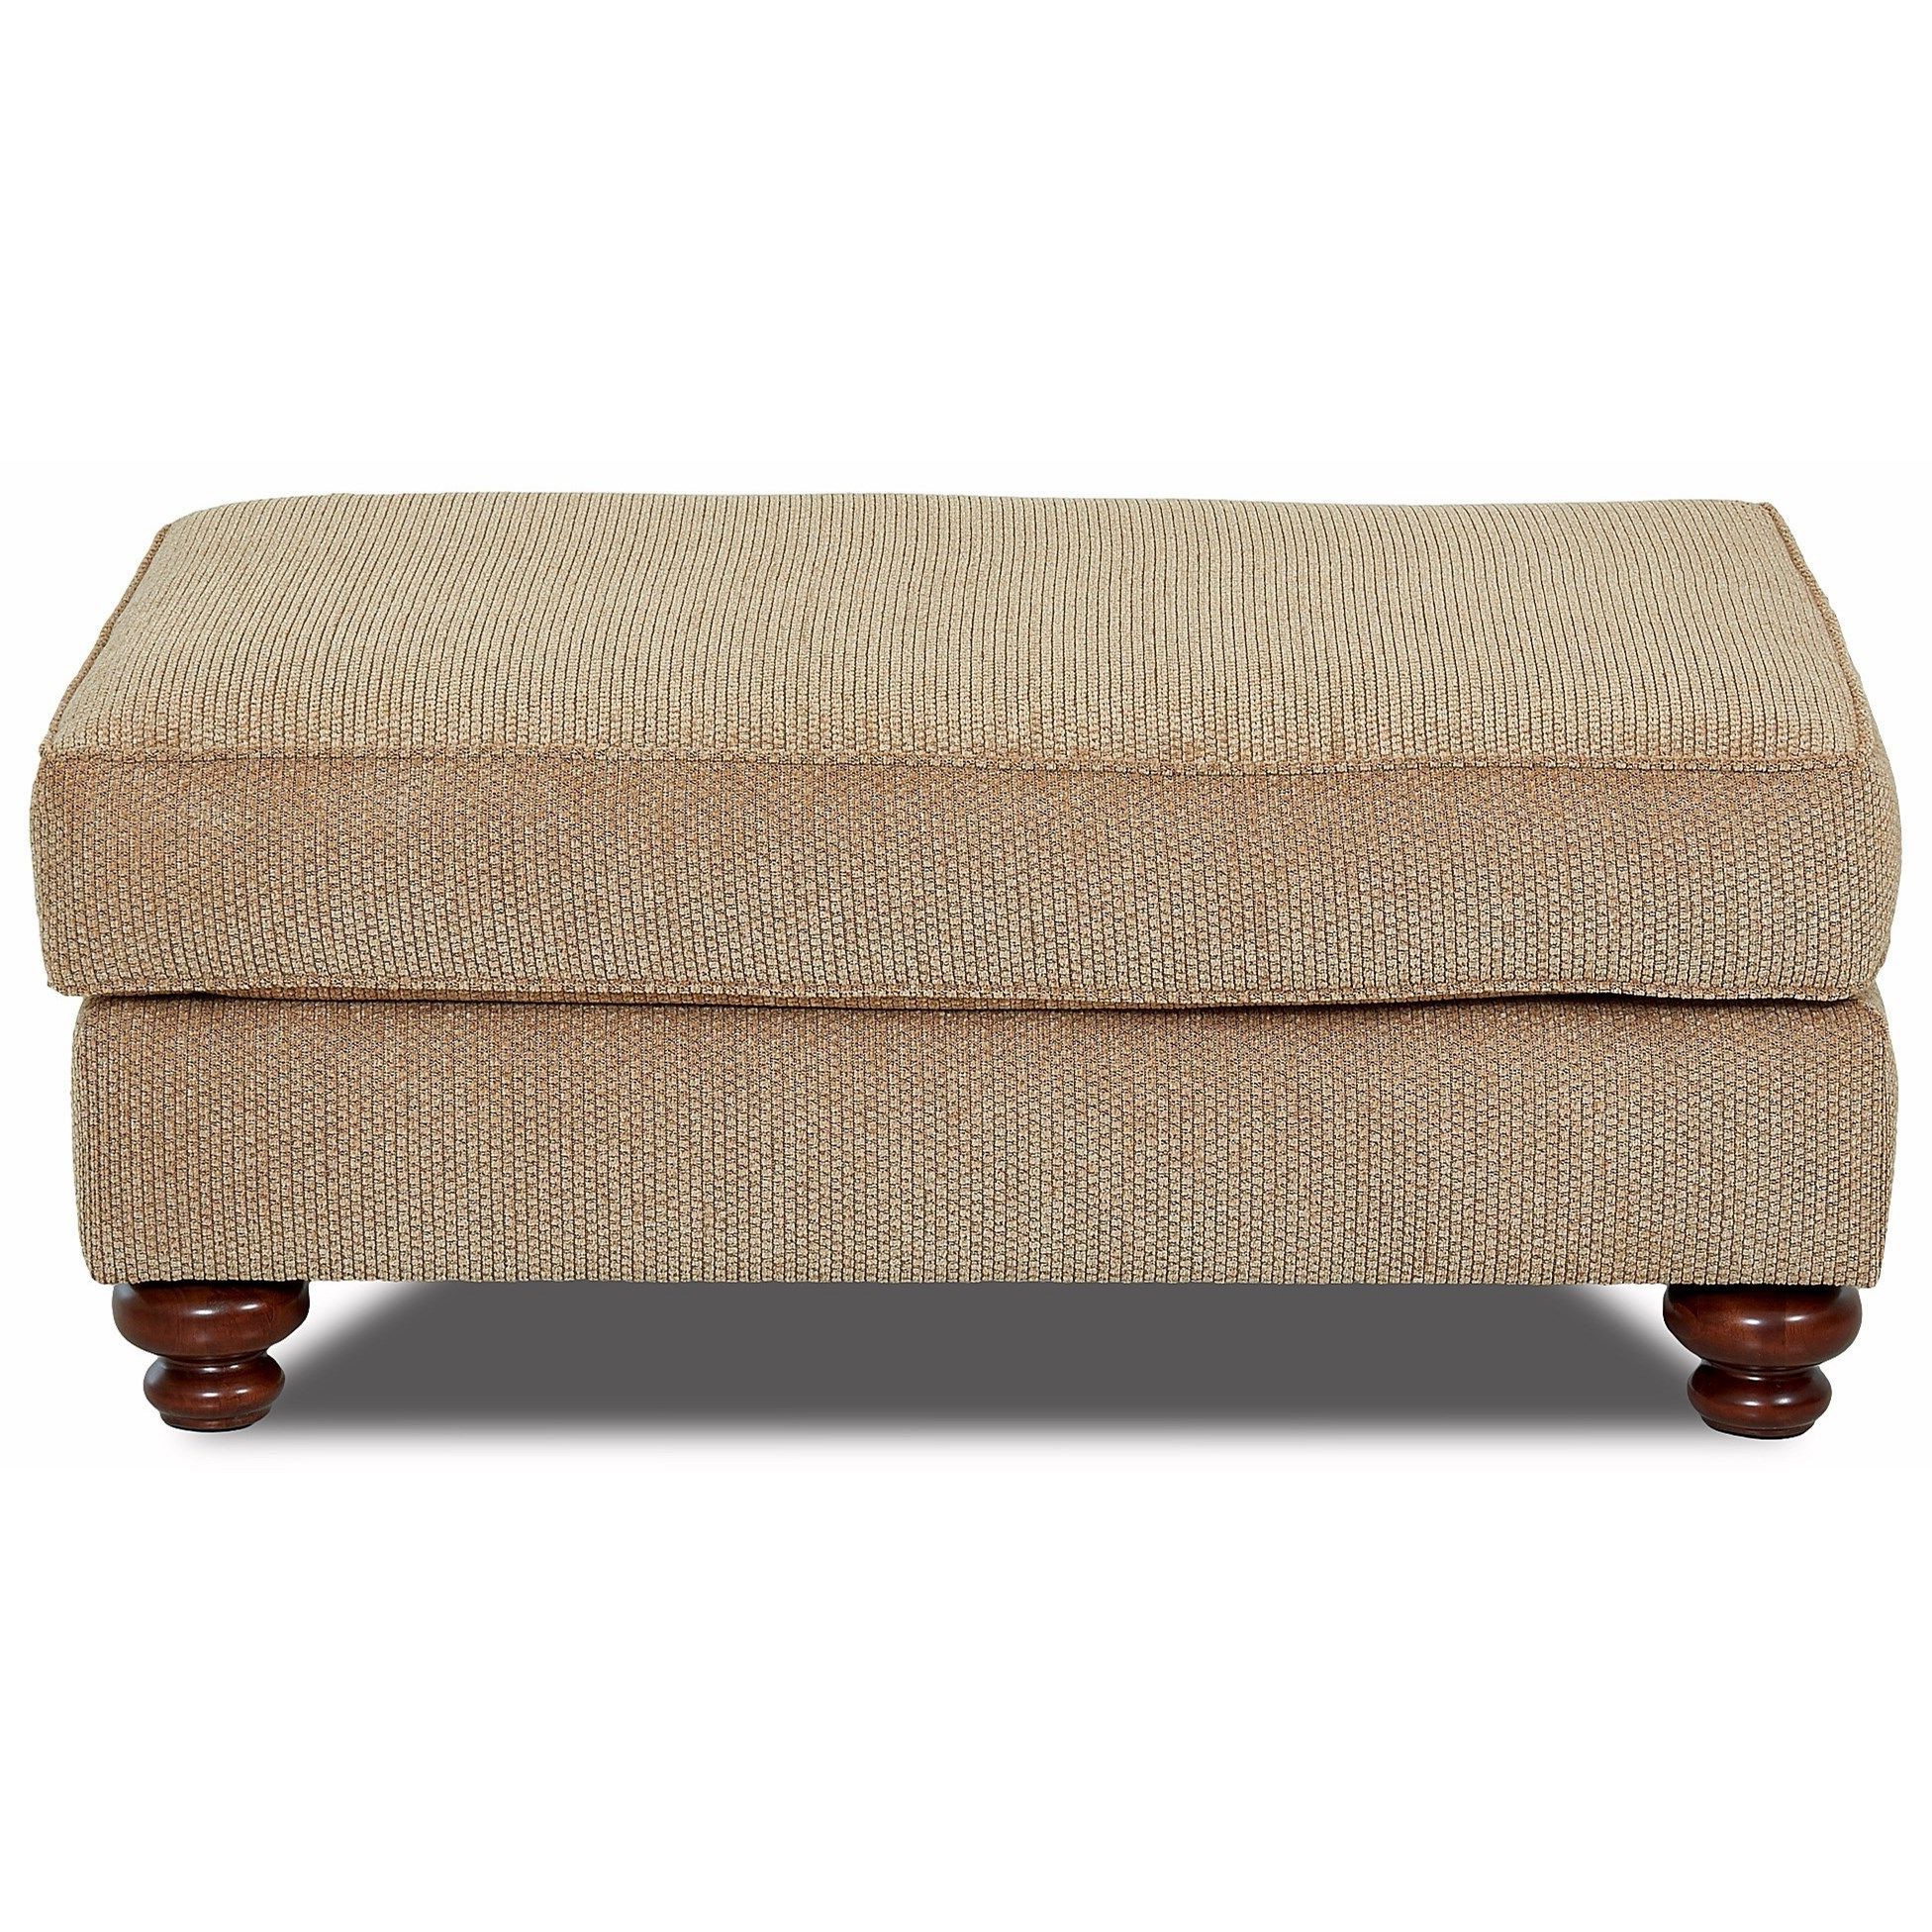 Popular Declan Traditional Oversized Ottoman With Turned Wood Legsklaussner For Wooden Legs Ottomans (View 6 of 10)